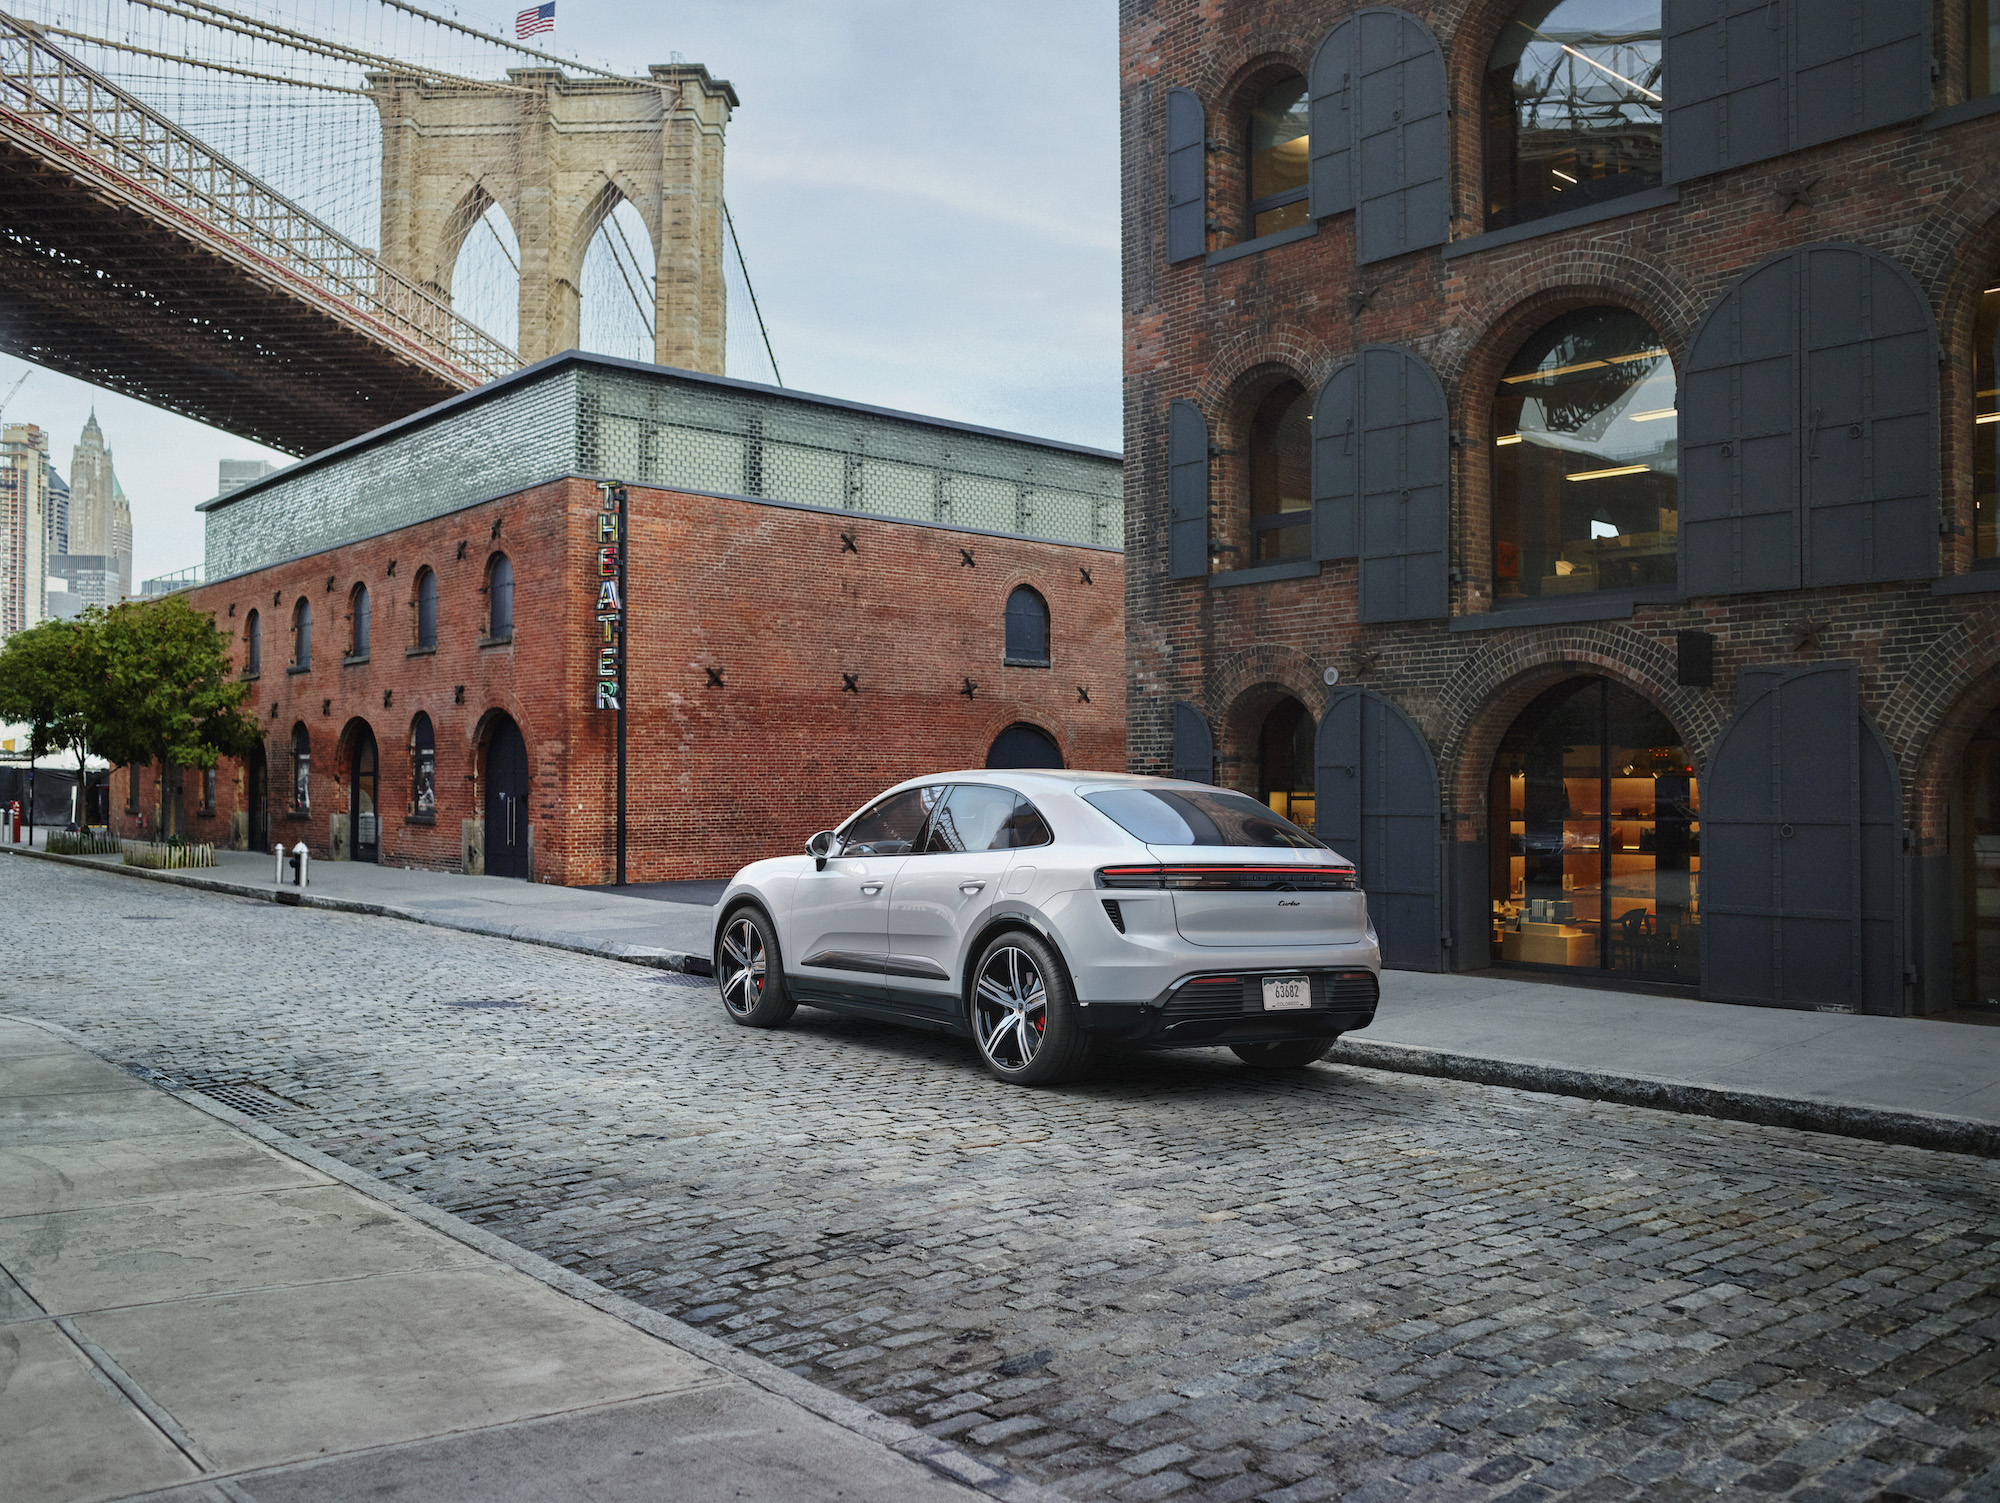 The Porsche Macan EV is a bet that buyers still want pricey electric vehicles